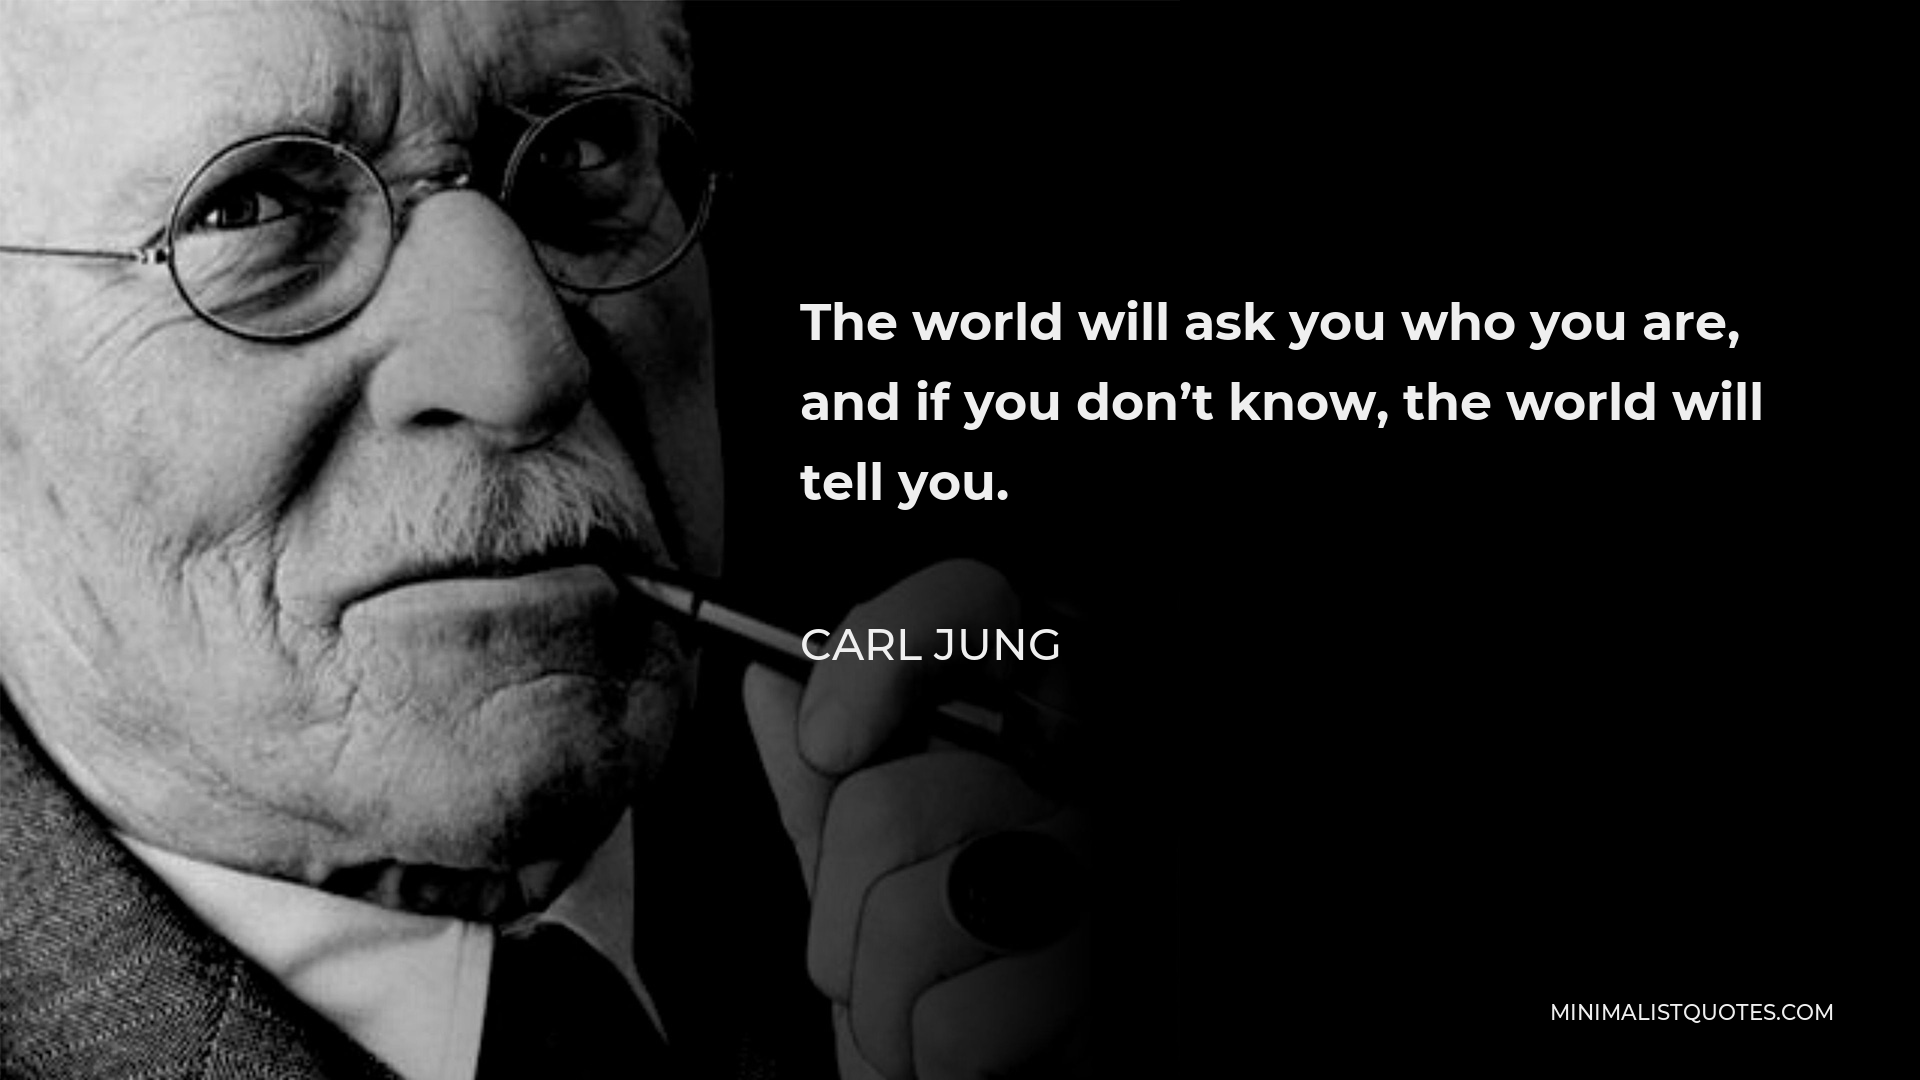 Carl Jung Quote - The world will ask you who you are, and if you don’t know, the world will tell you.